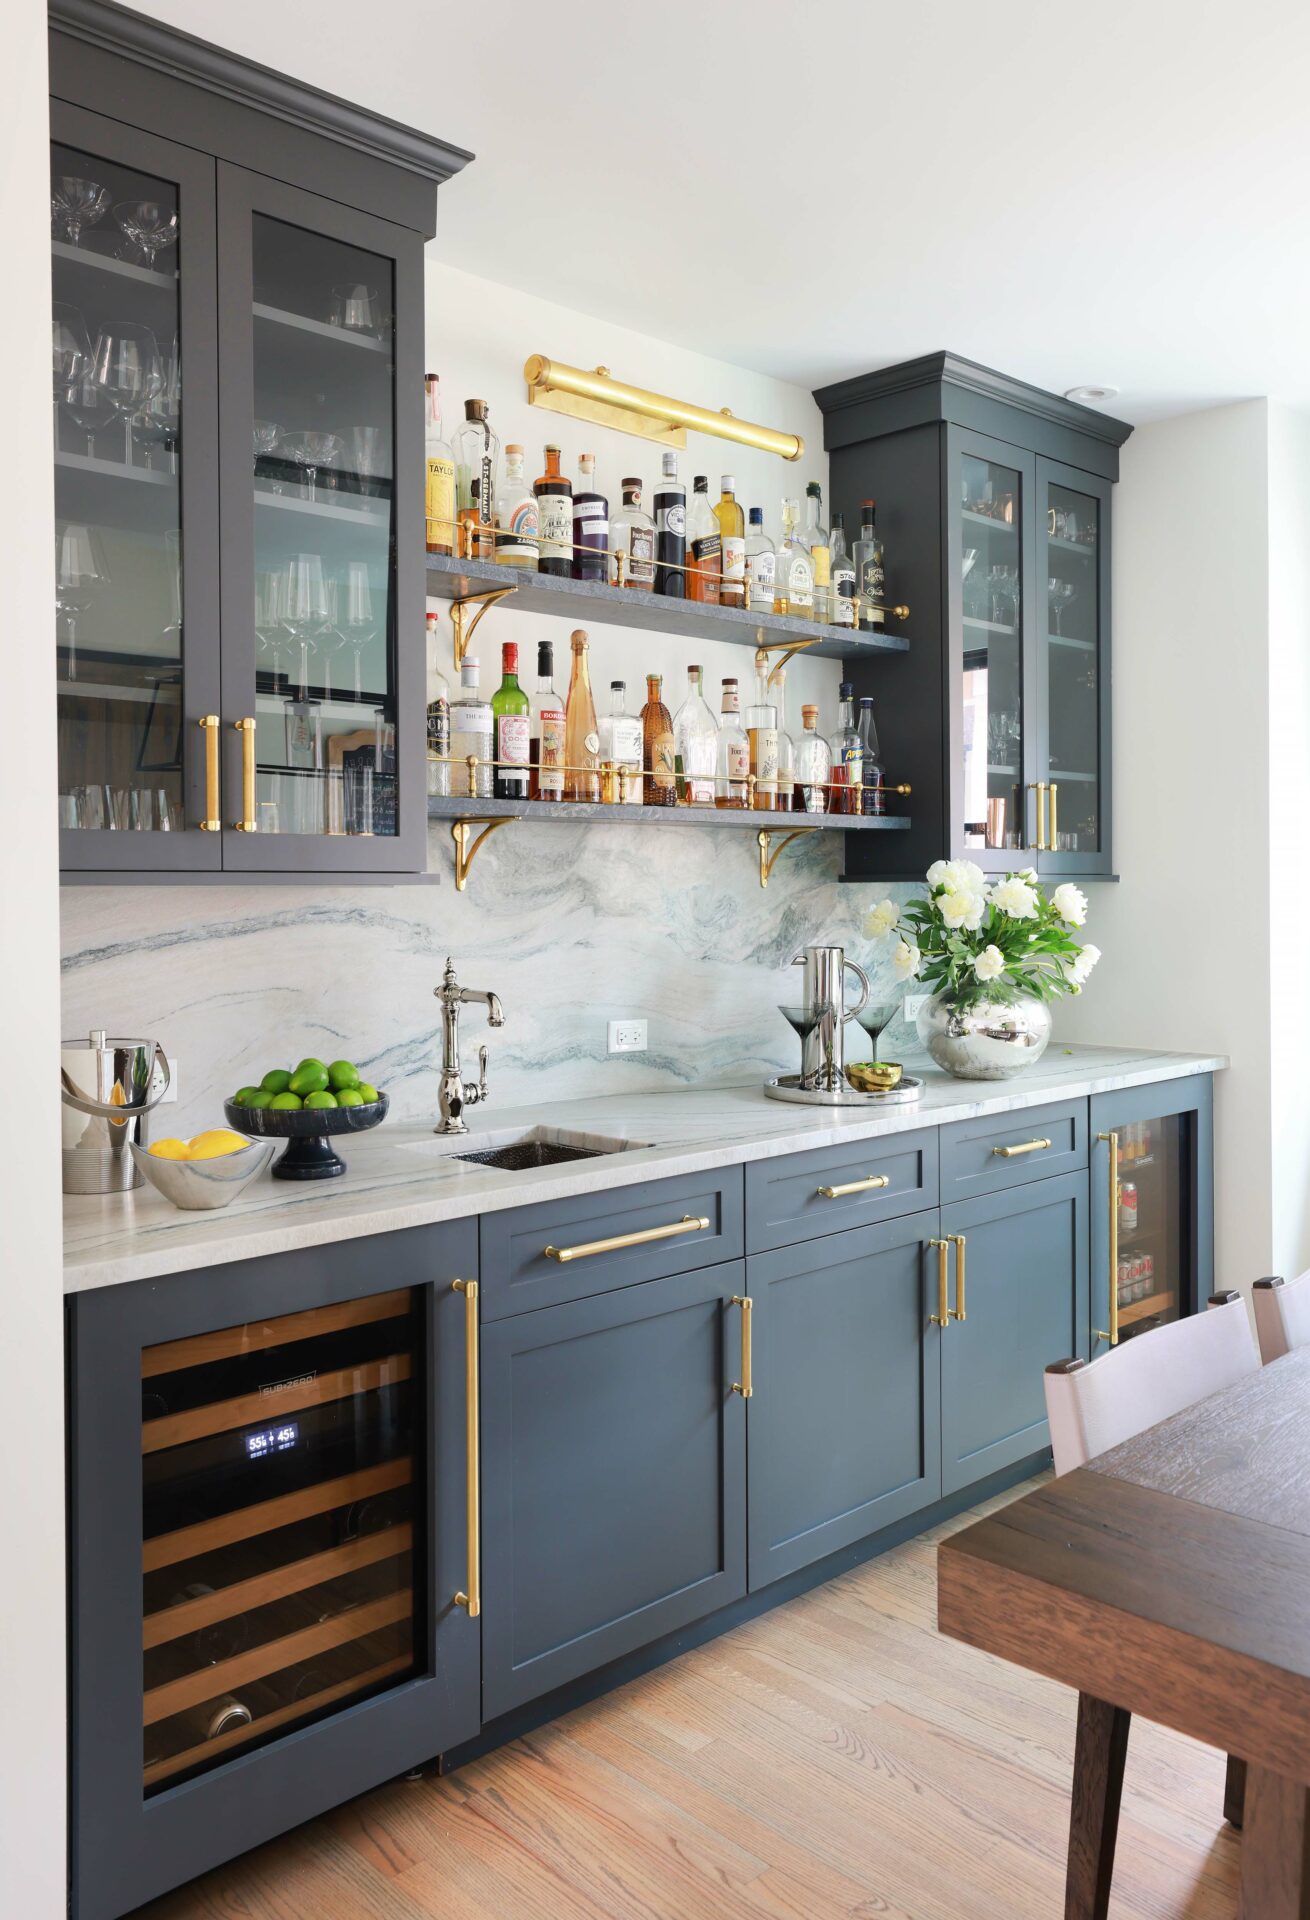 Wet bar with open shelving and painted cabinetry